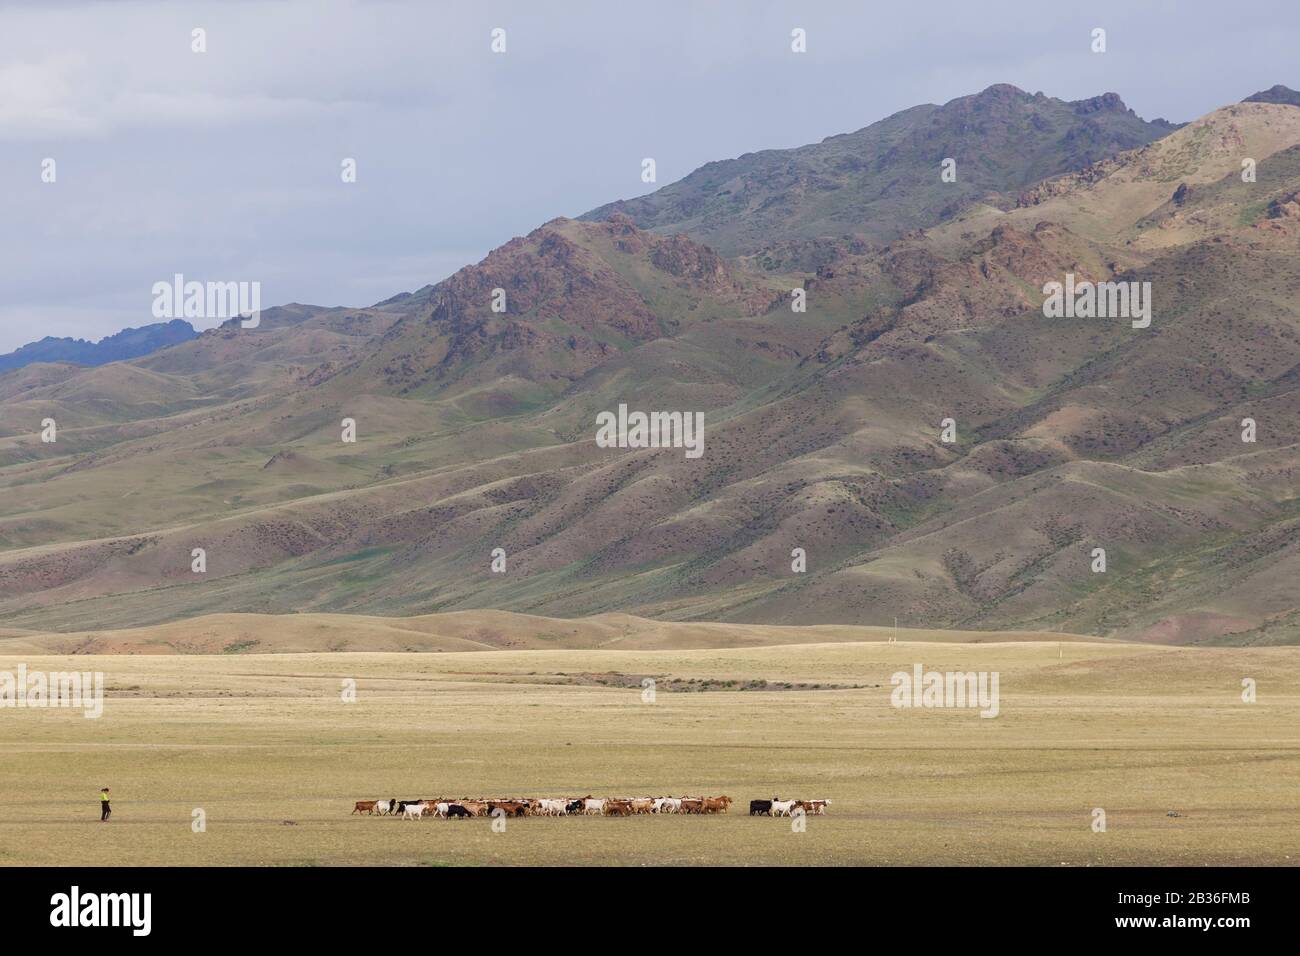 Mongolia, Omnogovi province, near Dalanzadgad, young shepherd and herd of goats in the grassy steppe Stock Photo